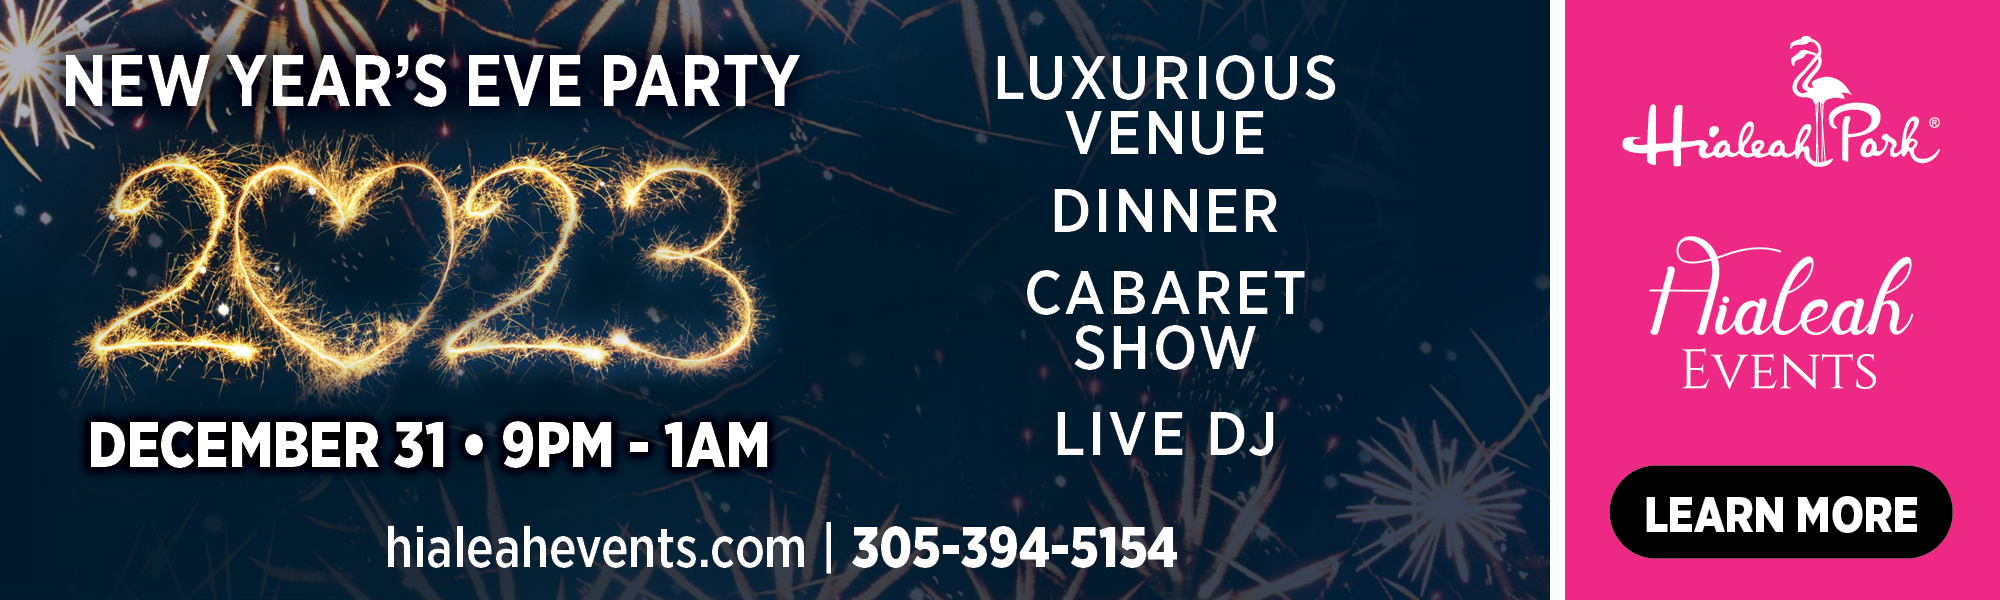 New Years Eve Party | December 31